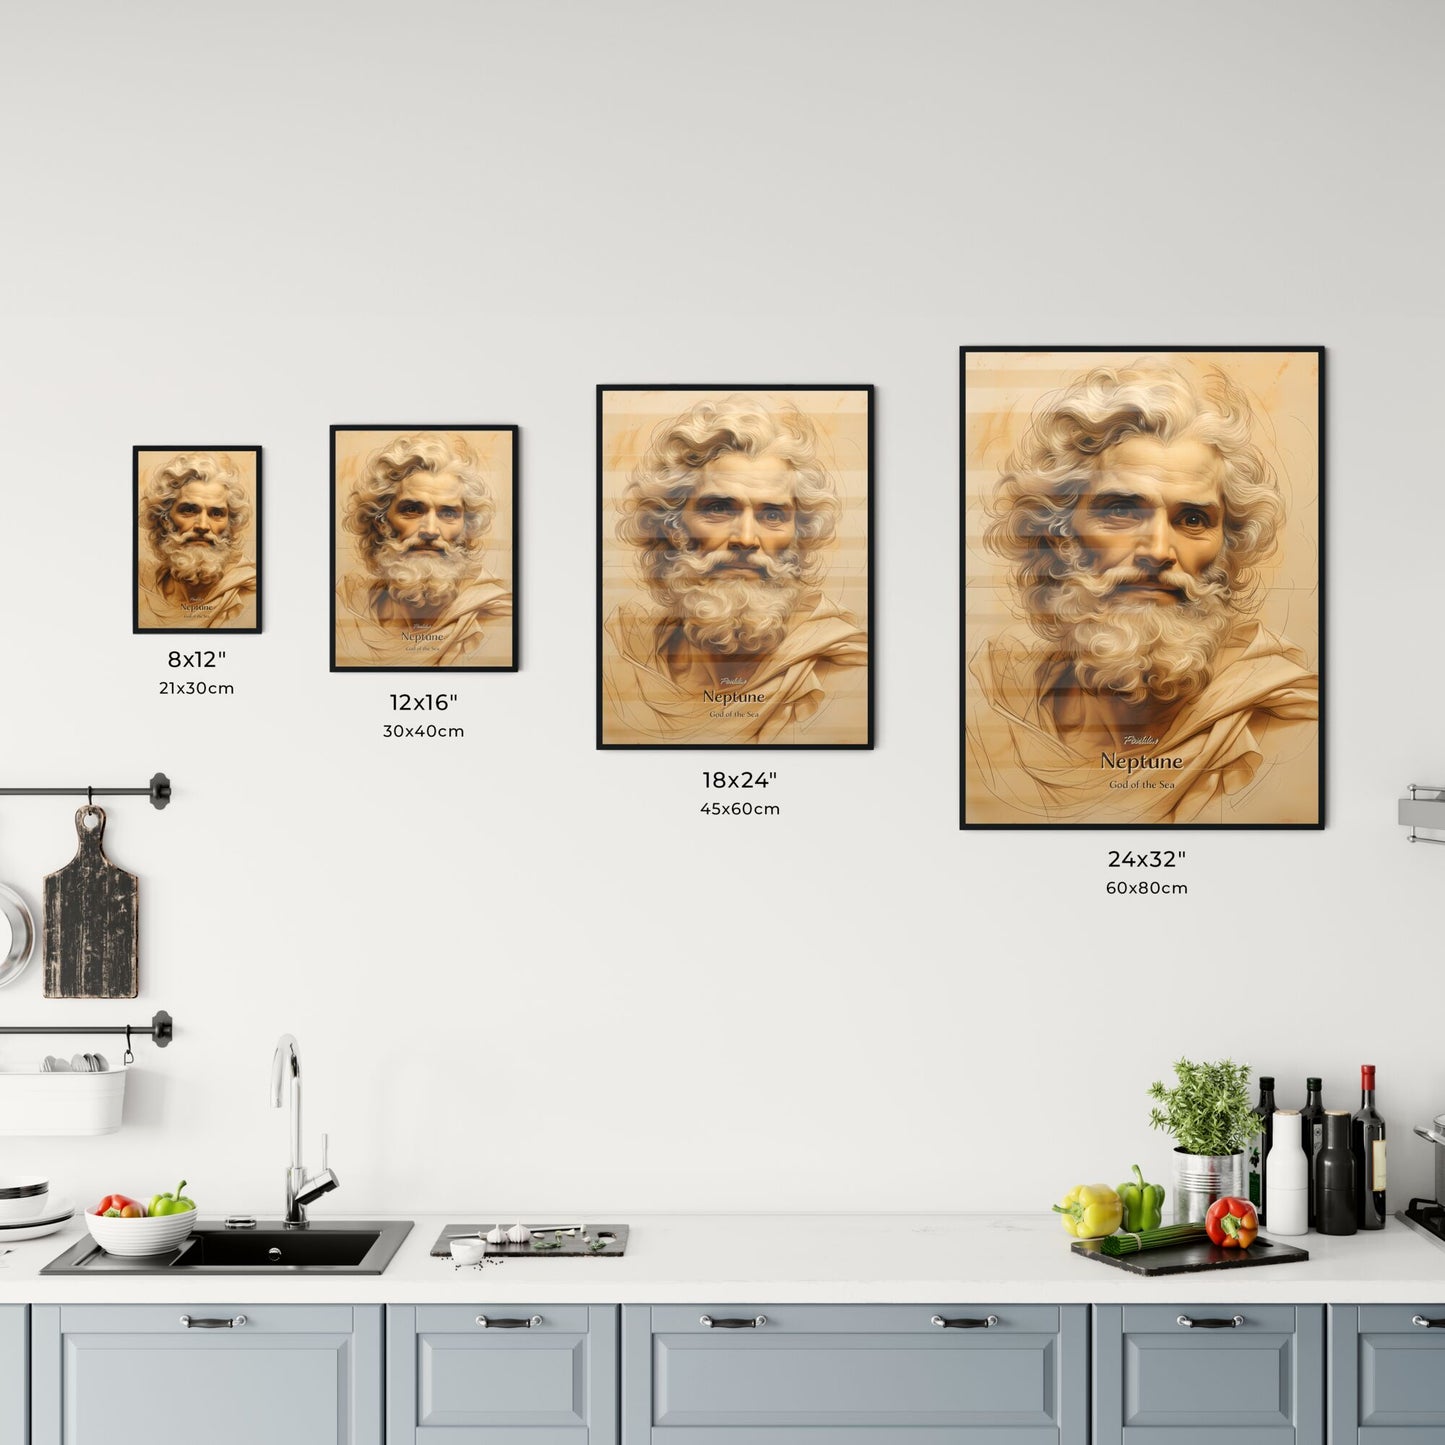 Poseidon, Neptune, God of the Sea, A Poster of a drawing of a man with a beard Default Title